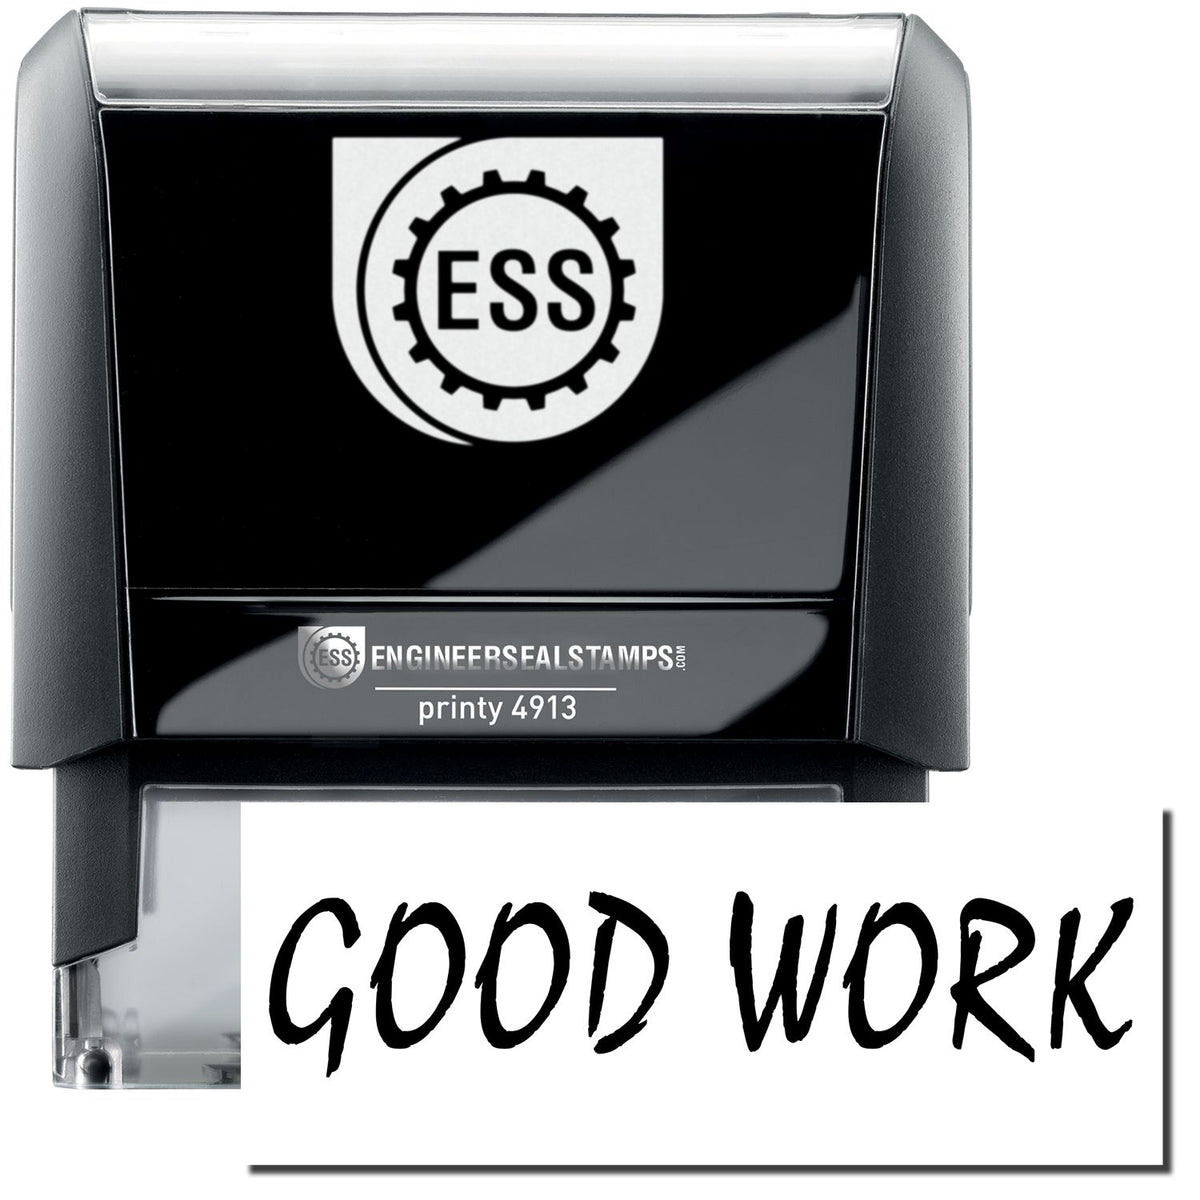 A self-inking stamp with a stamped image showing how the text &quot;GOOD WORK&quot; in a unique large bold font is displayed by it.